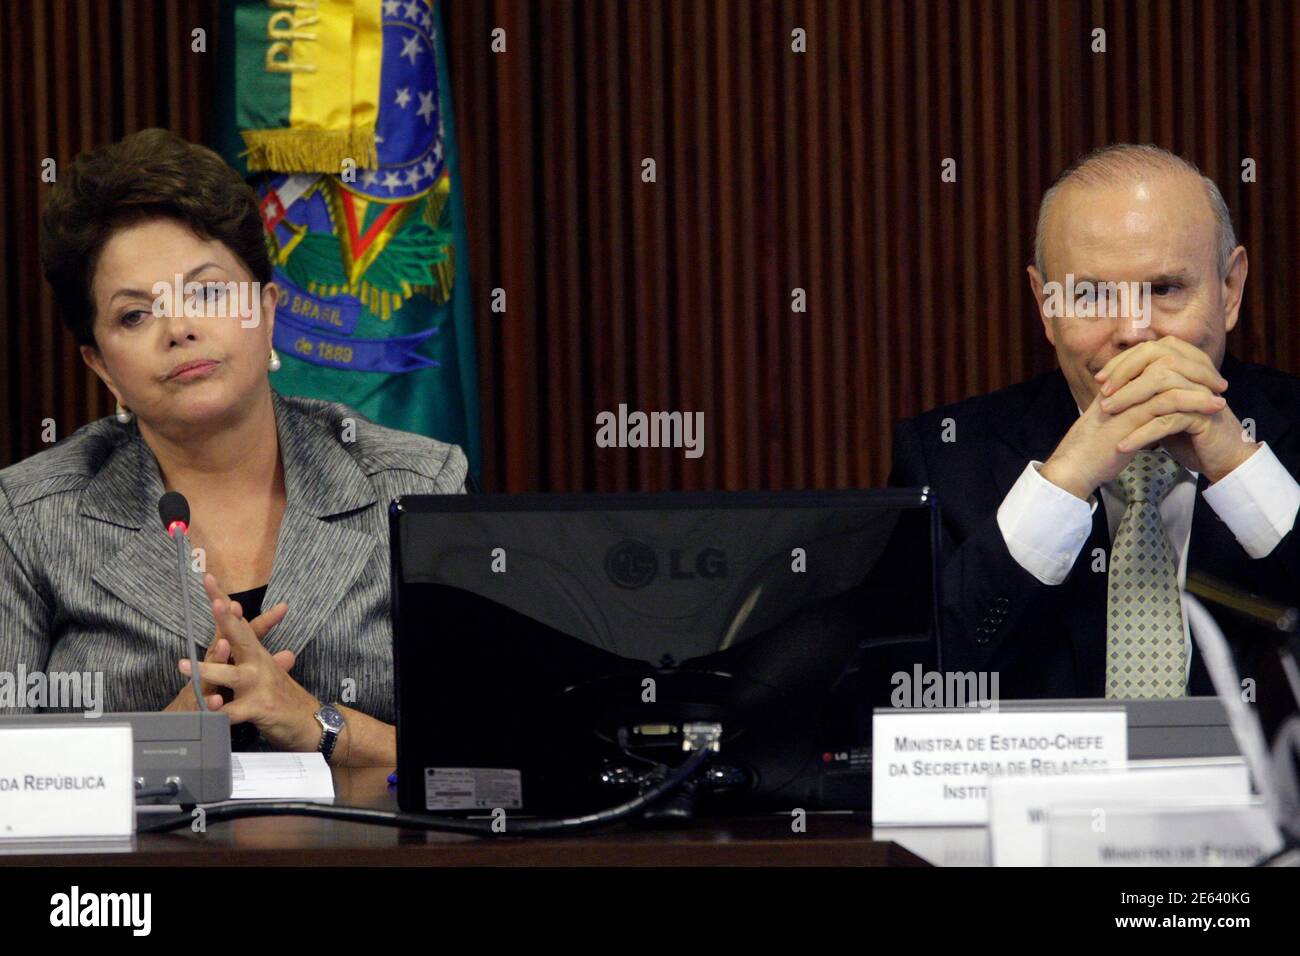 Brazil's President Dilma Rousseff (L) and Finance Minister Guido Mantega attend a meeting with a political council in Brasilia August 29, 2011. Rousseff will outline a tight budget for next year on Monday, government sources said, reaffirming her commitment to spending control and paving the way for interest rate cuts.        REUTERS/Ueslei Marcelino (BRAZIL - Tags: POLITICS BUSINESS TPX IMAGES OF THE DAY) Stock Photo